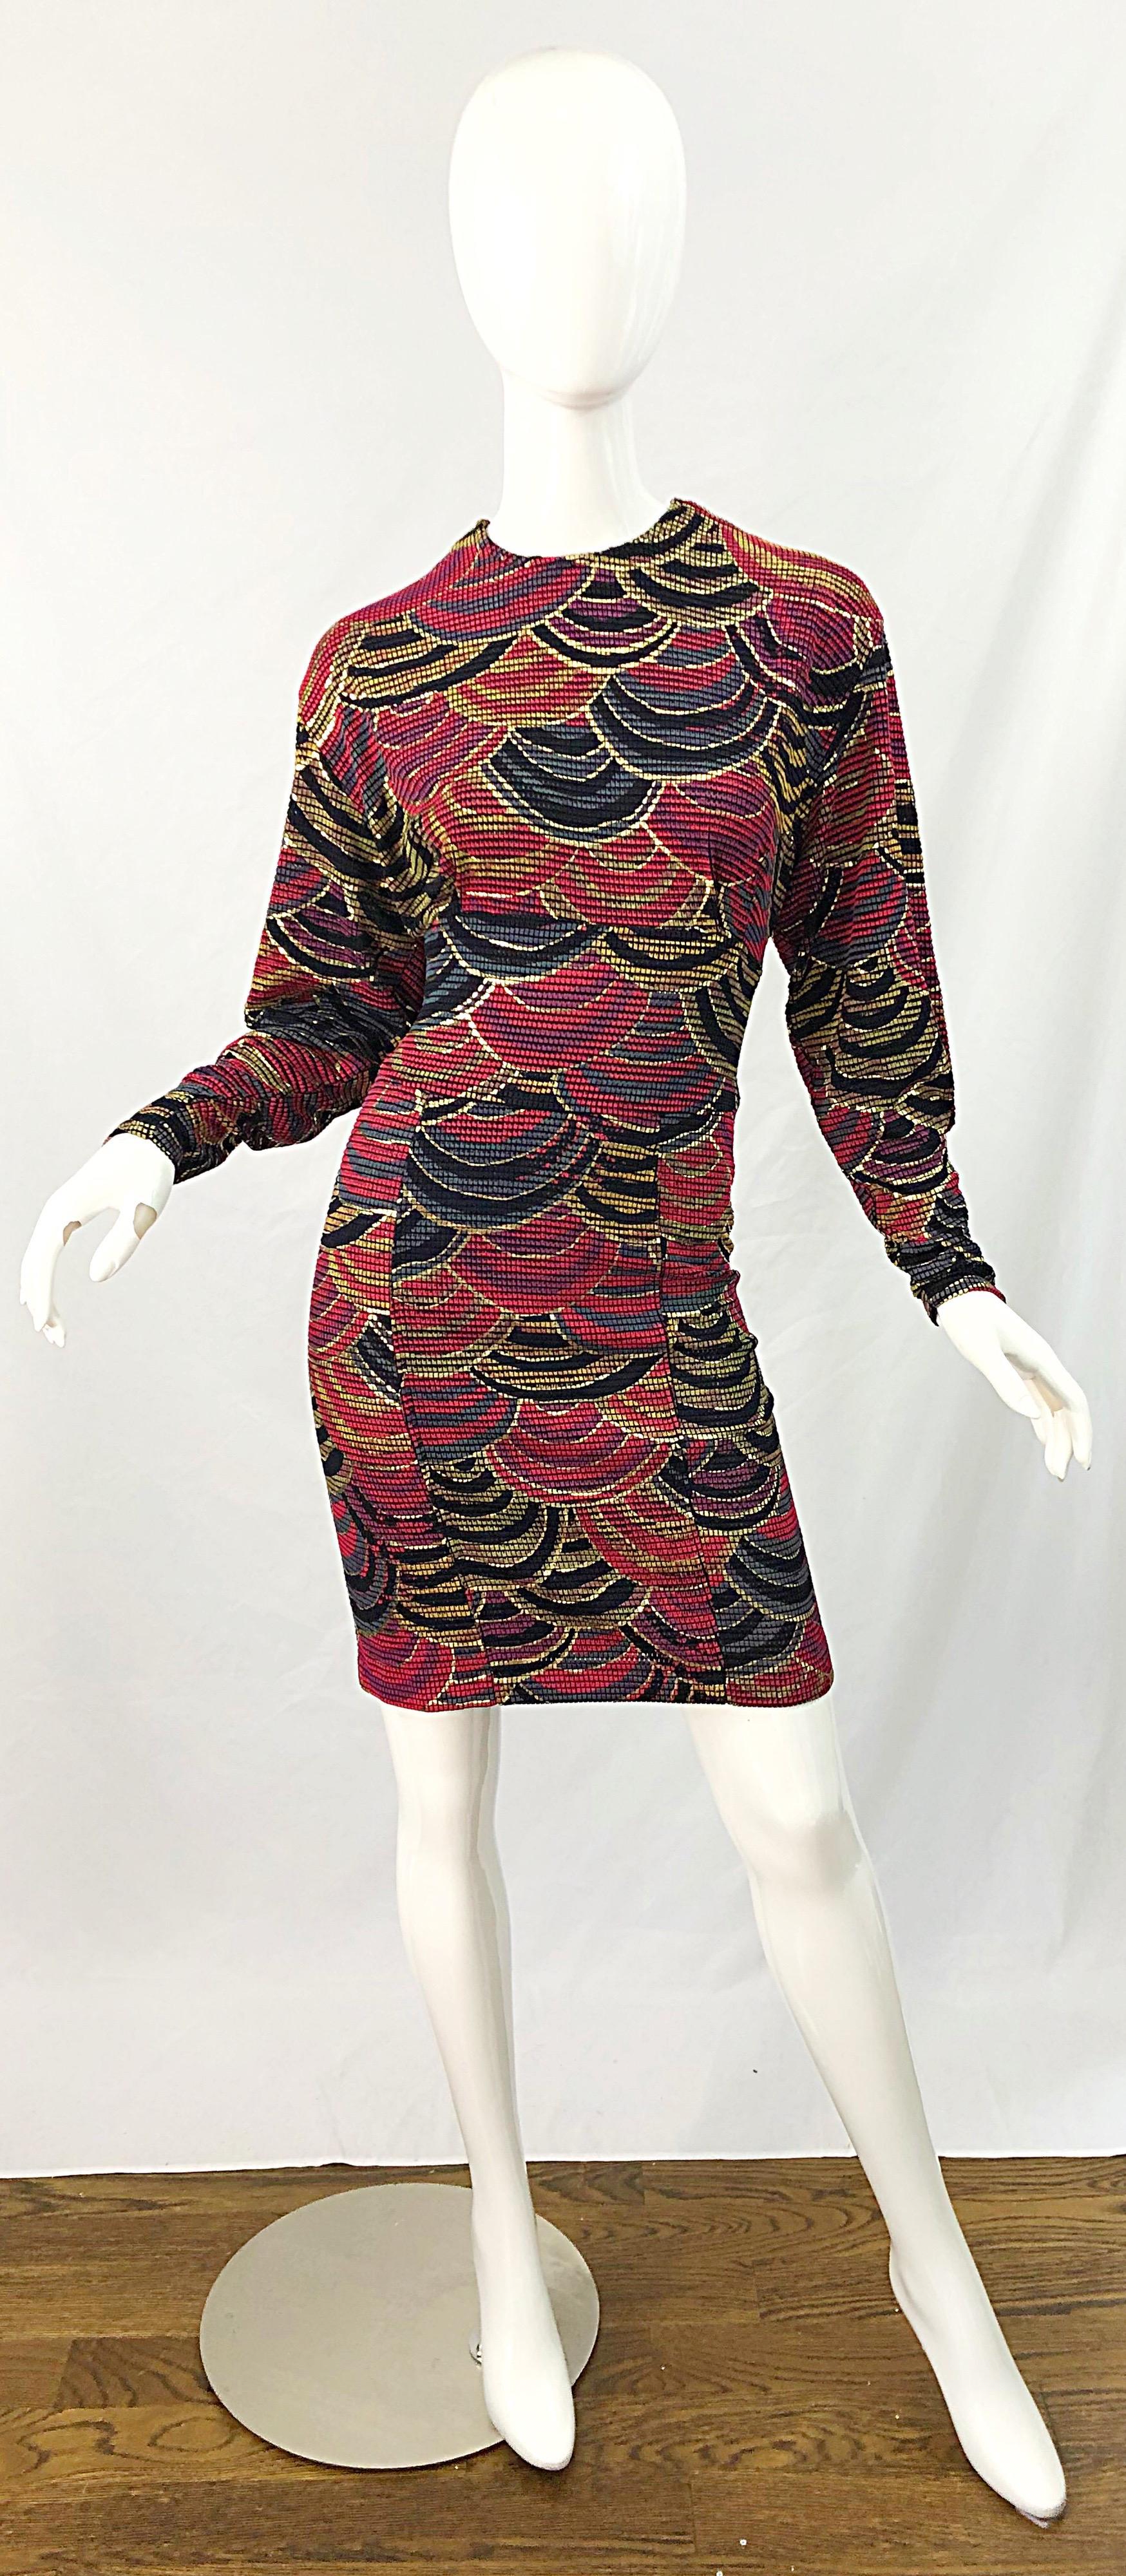 Avant Garde 1980s hand painted gold, red, and hunter forest green long sleeve reversible dress ! This dress was brilliantly designed to wear either the zipper in the front or the back. There are bust supports on each side, but not visible when worn.